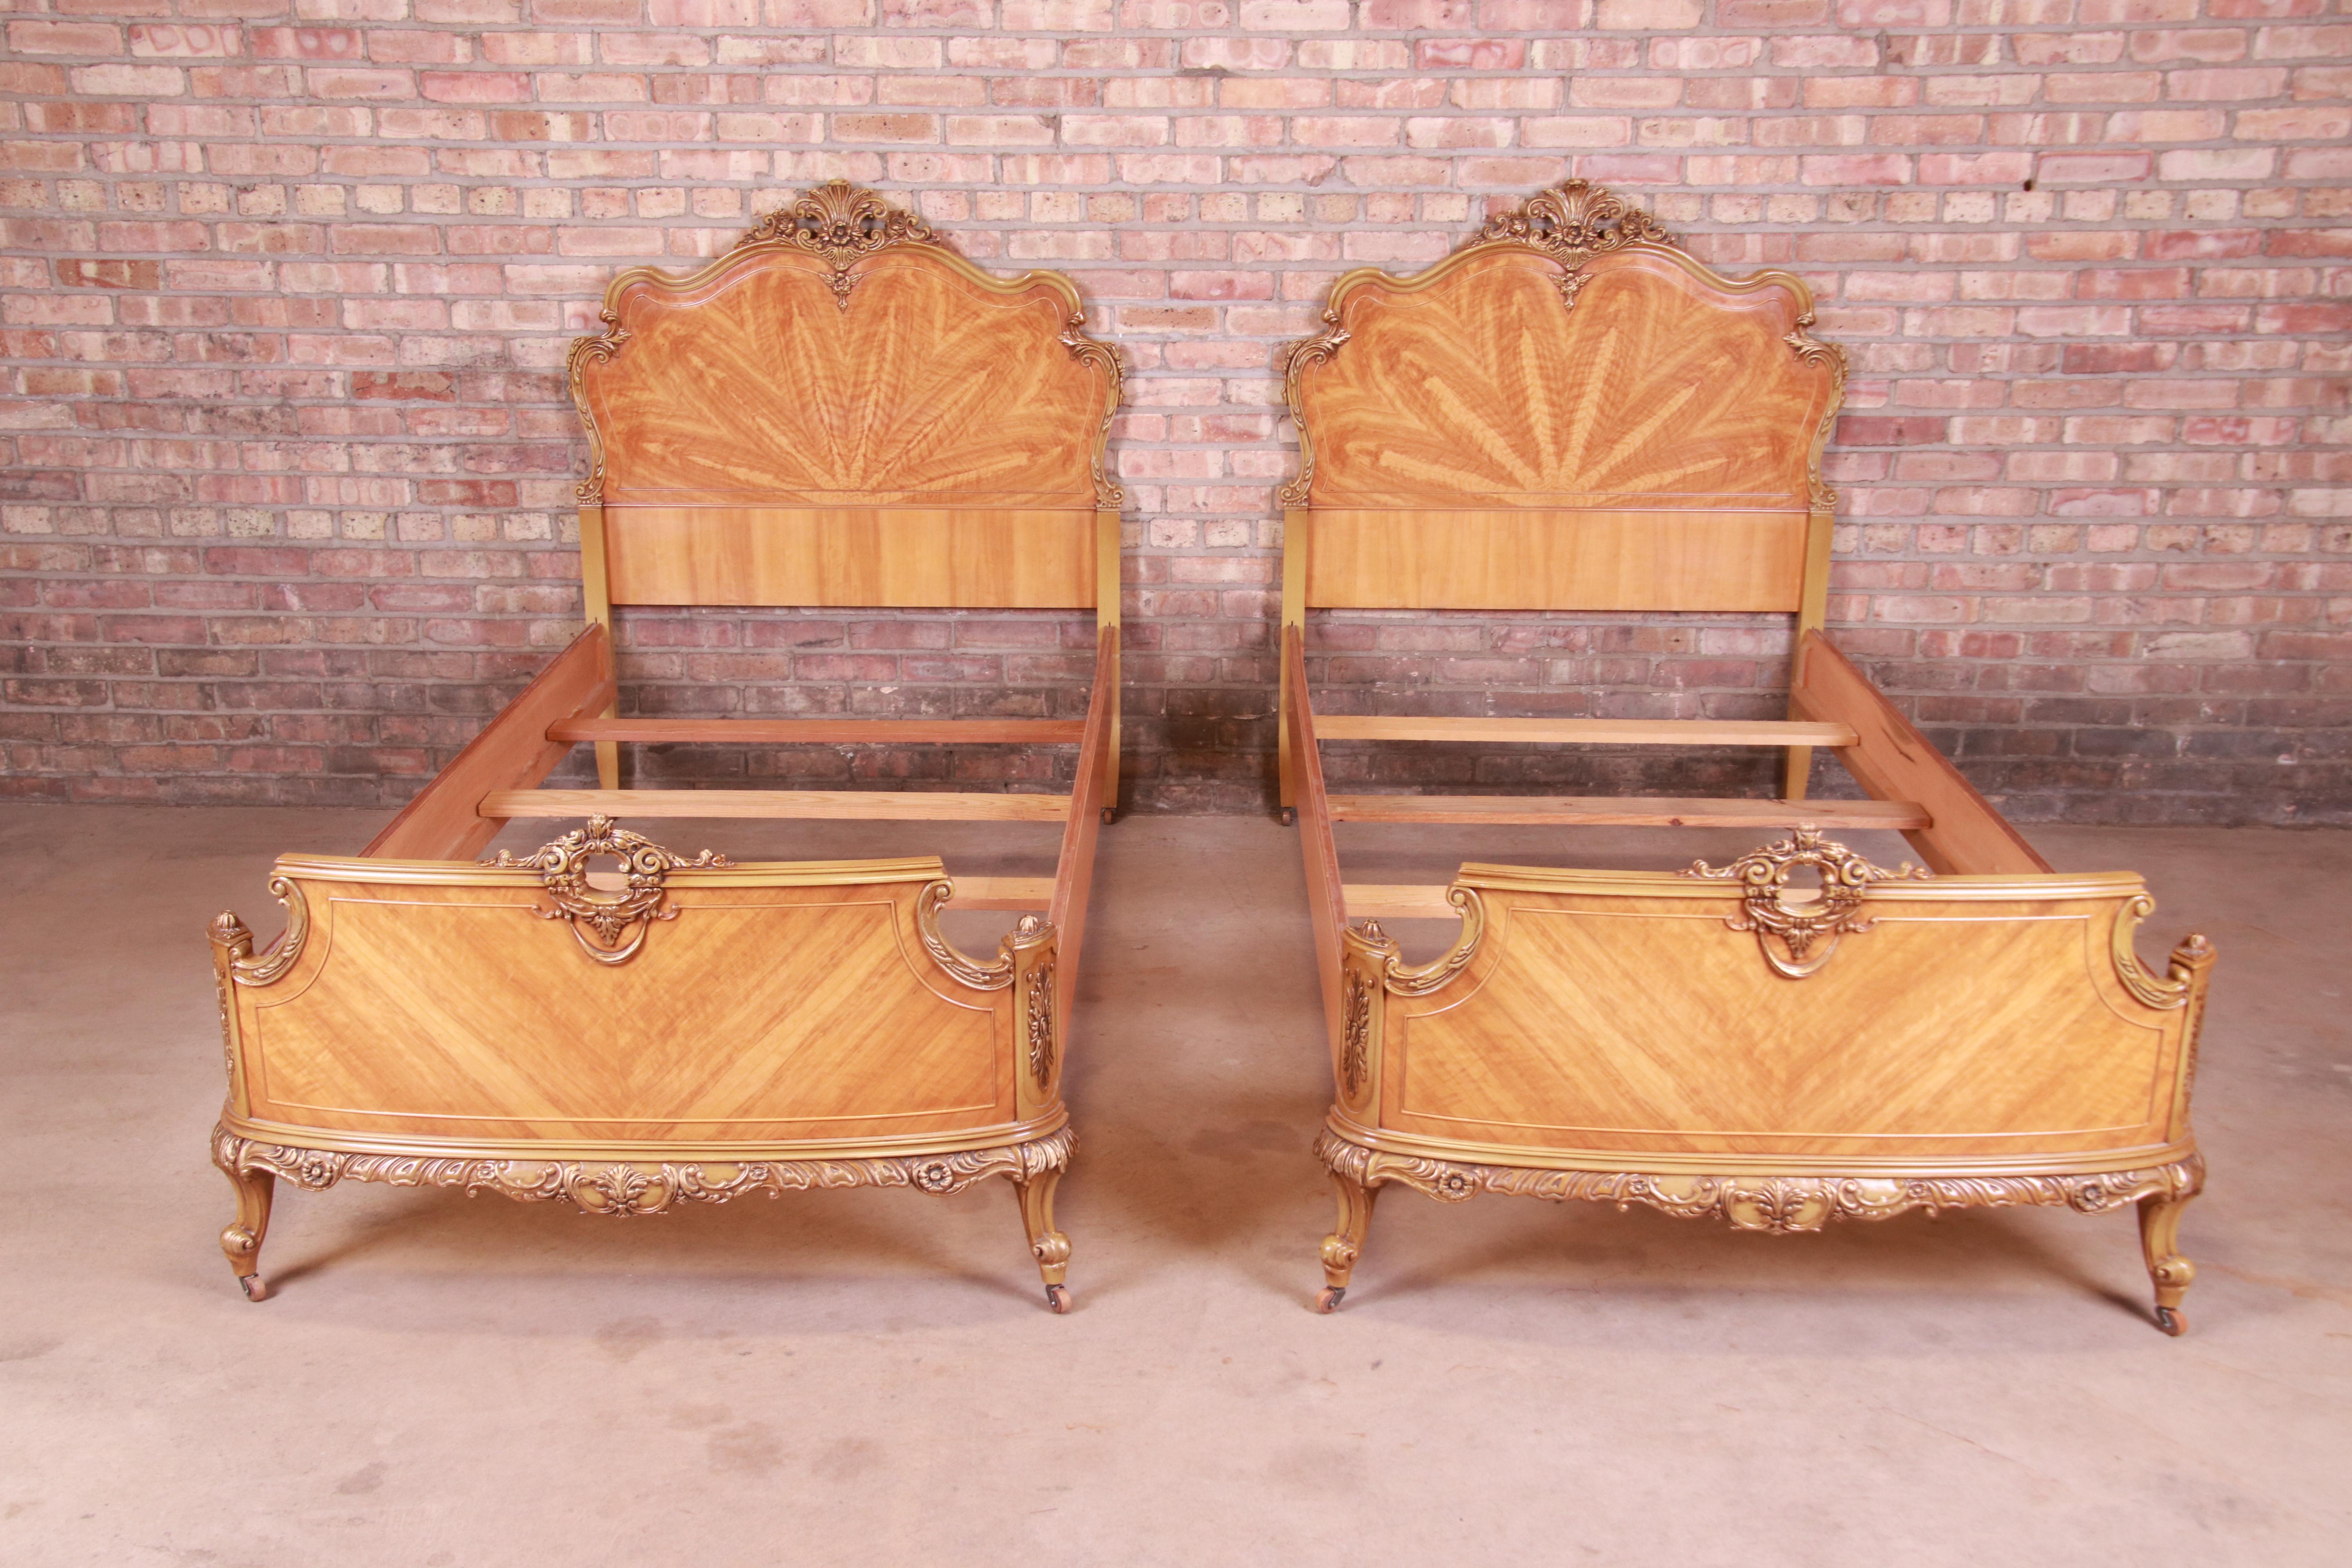 A gorgeous pair of French Rococo Louis XV style twin beds

Attributed to Romweber

USA, Circa 1930s

Inlaid satinwood, with paint and gilt details.

Measures: 43